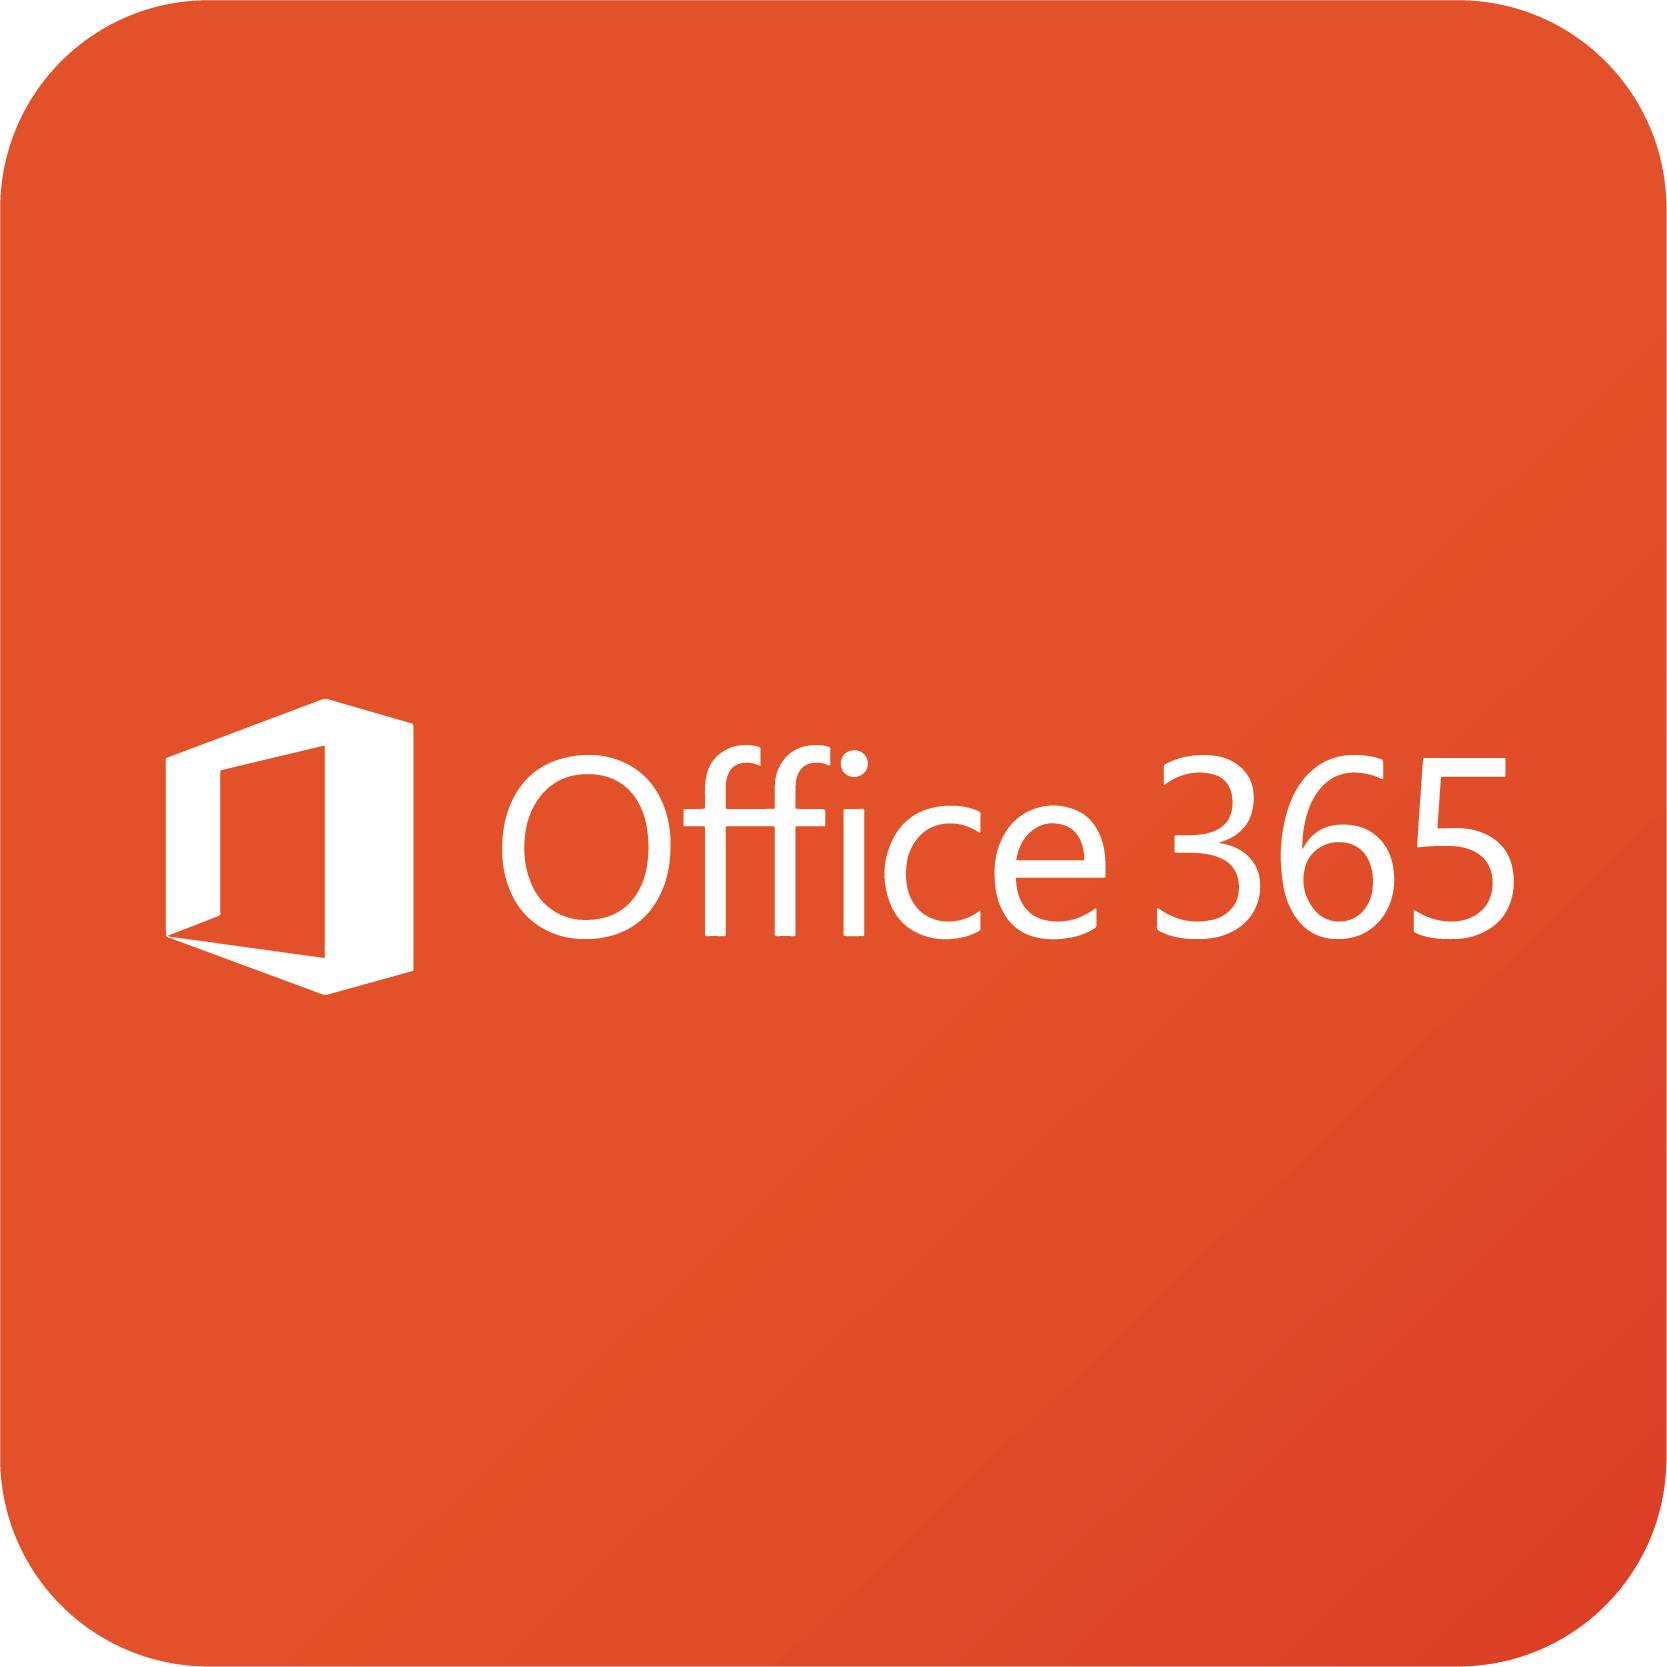 Email - Office 365 | Information Technology Services ...
